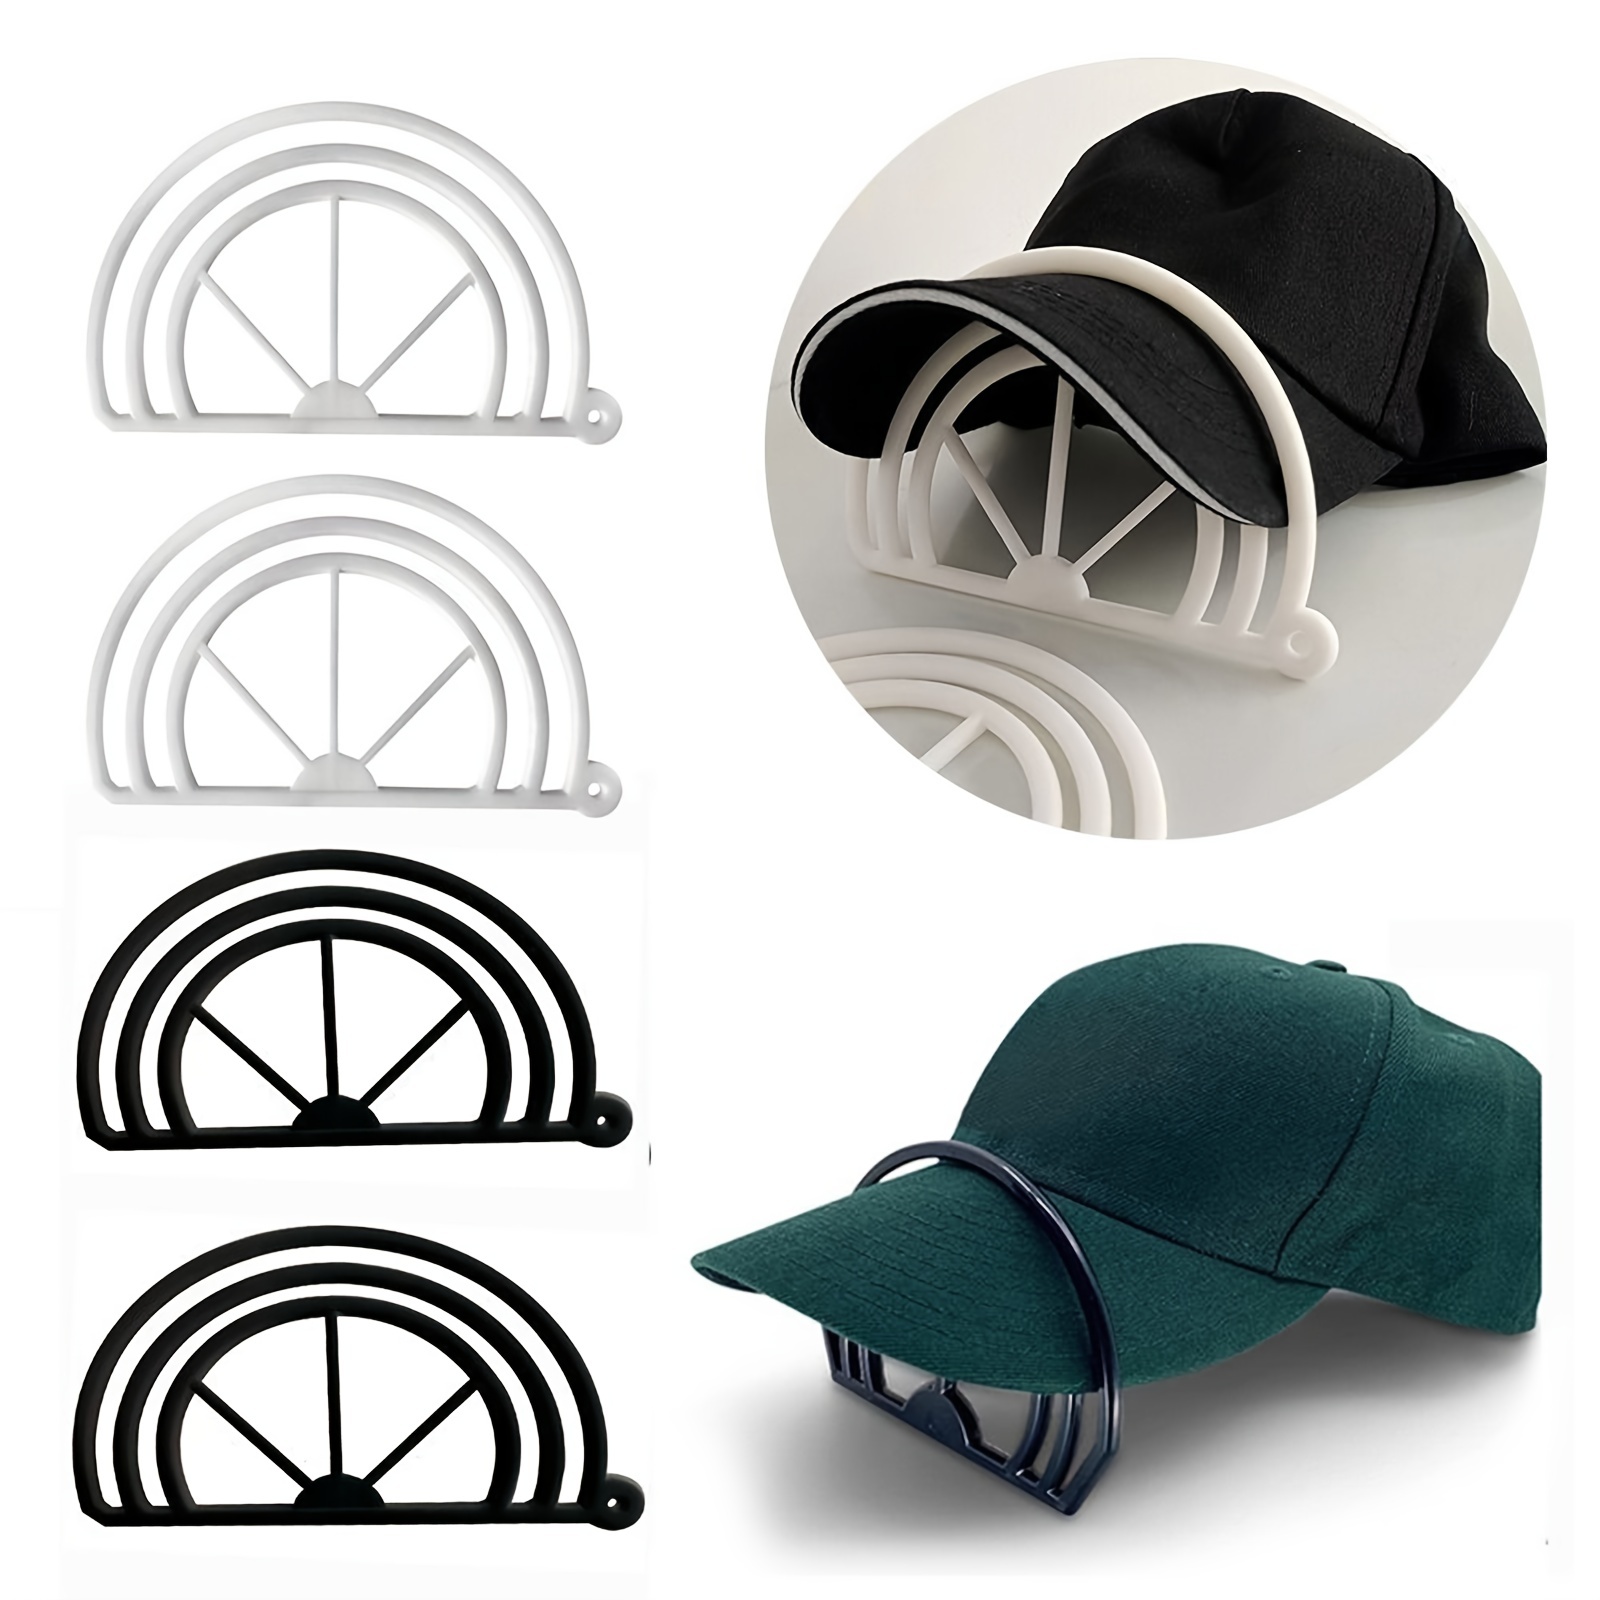 HAIBEIR Hat Stretcher Adjustable to All Hat Sizes  